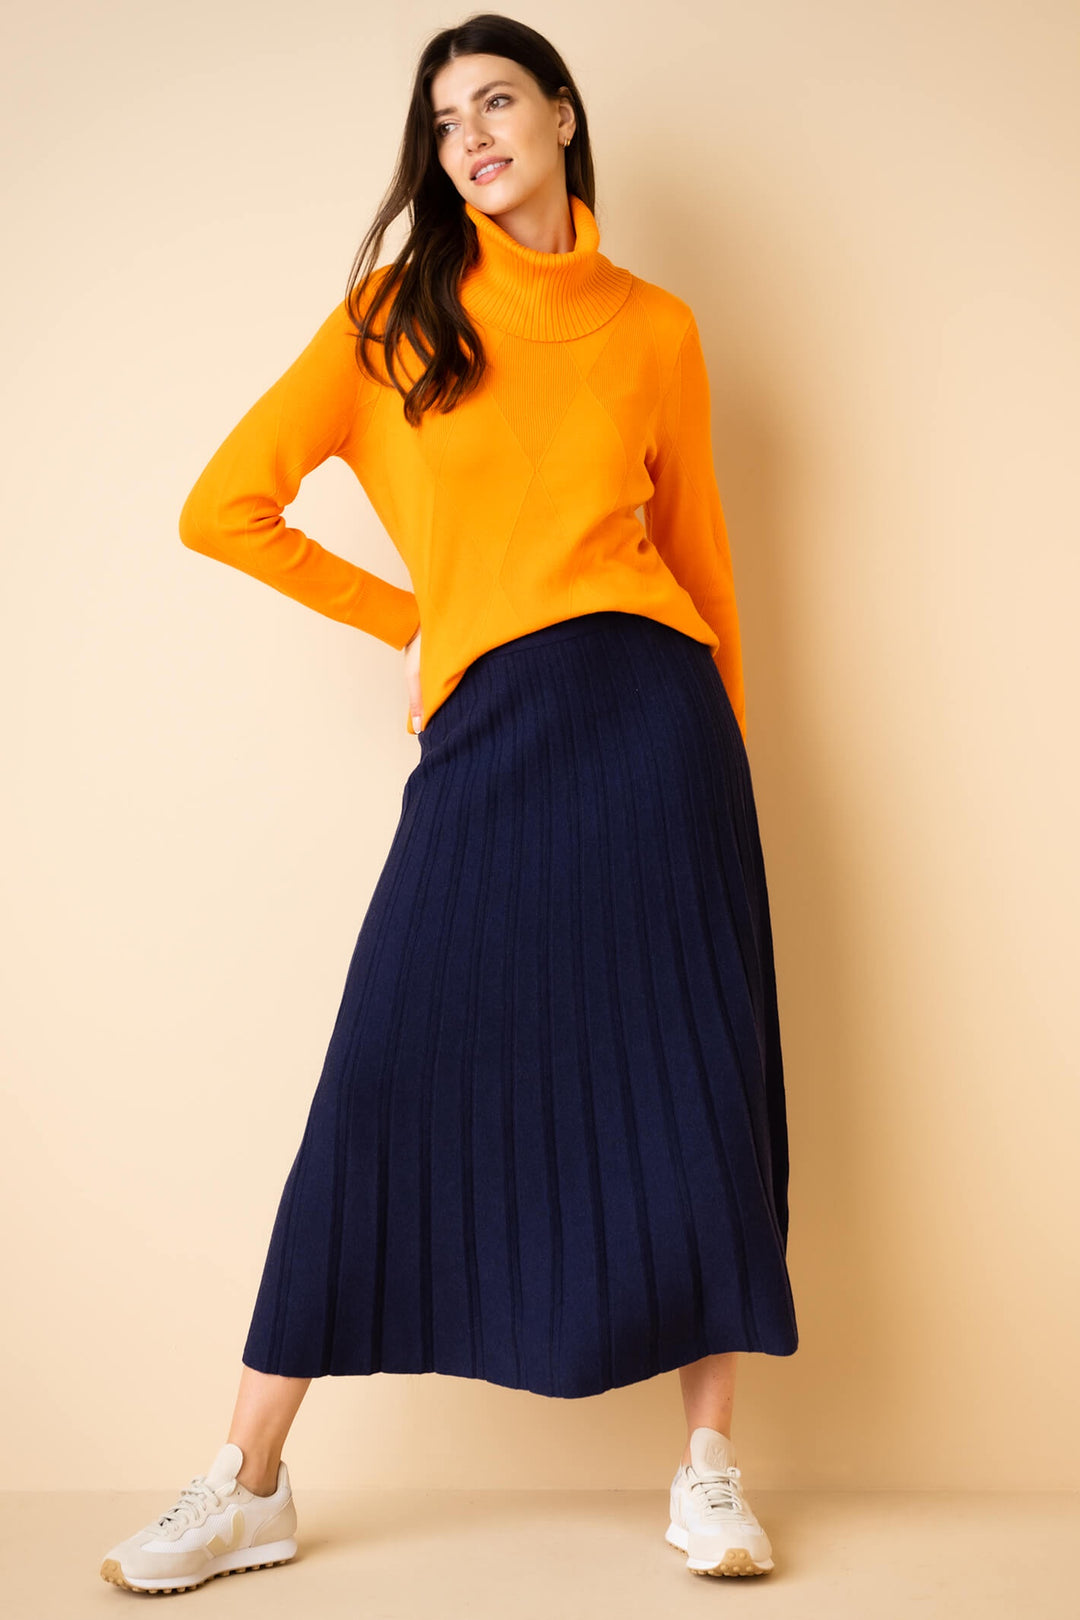 Marble 7176 103 Navy Pleated Knit Midi Skirt - Dotique